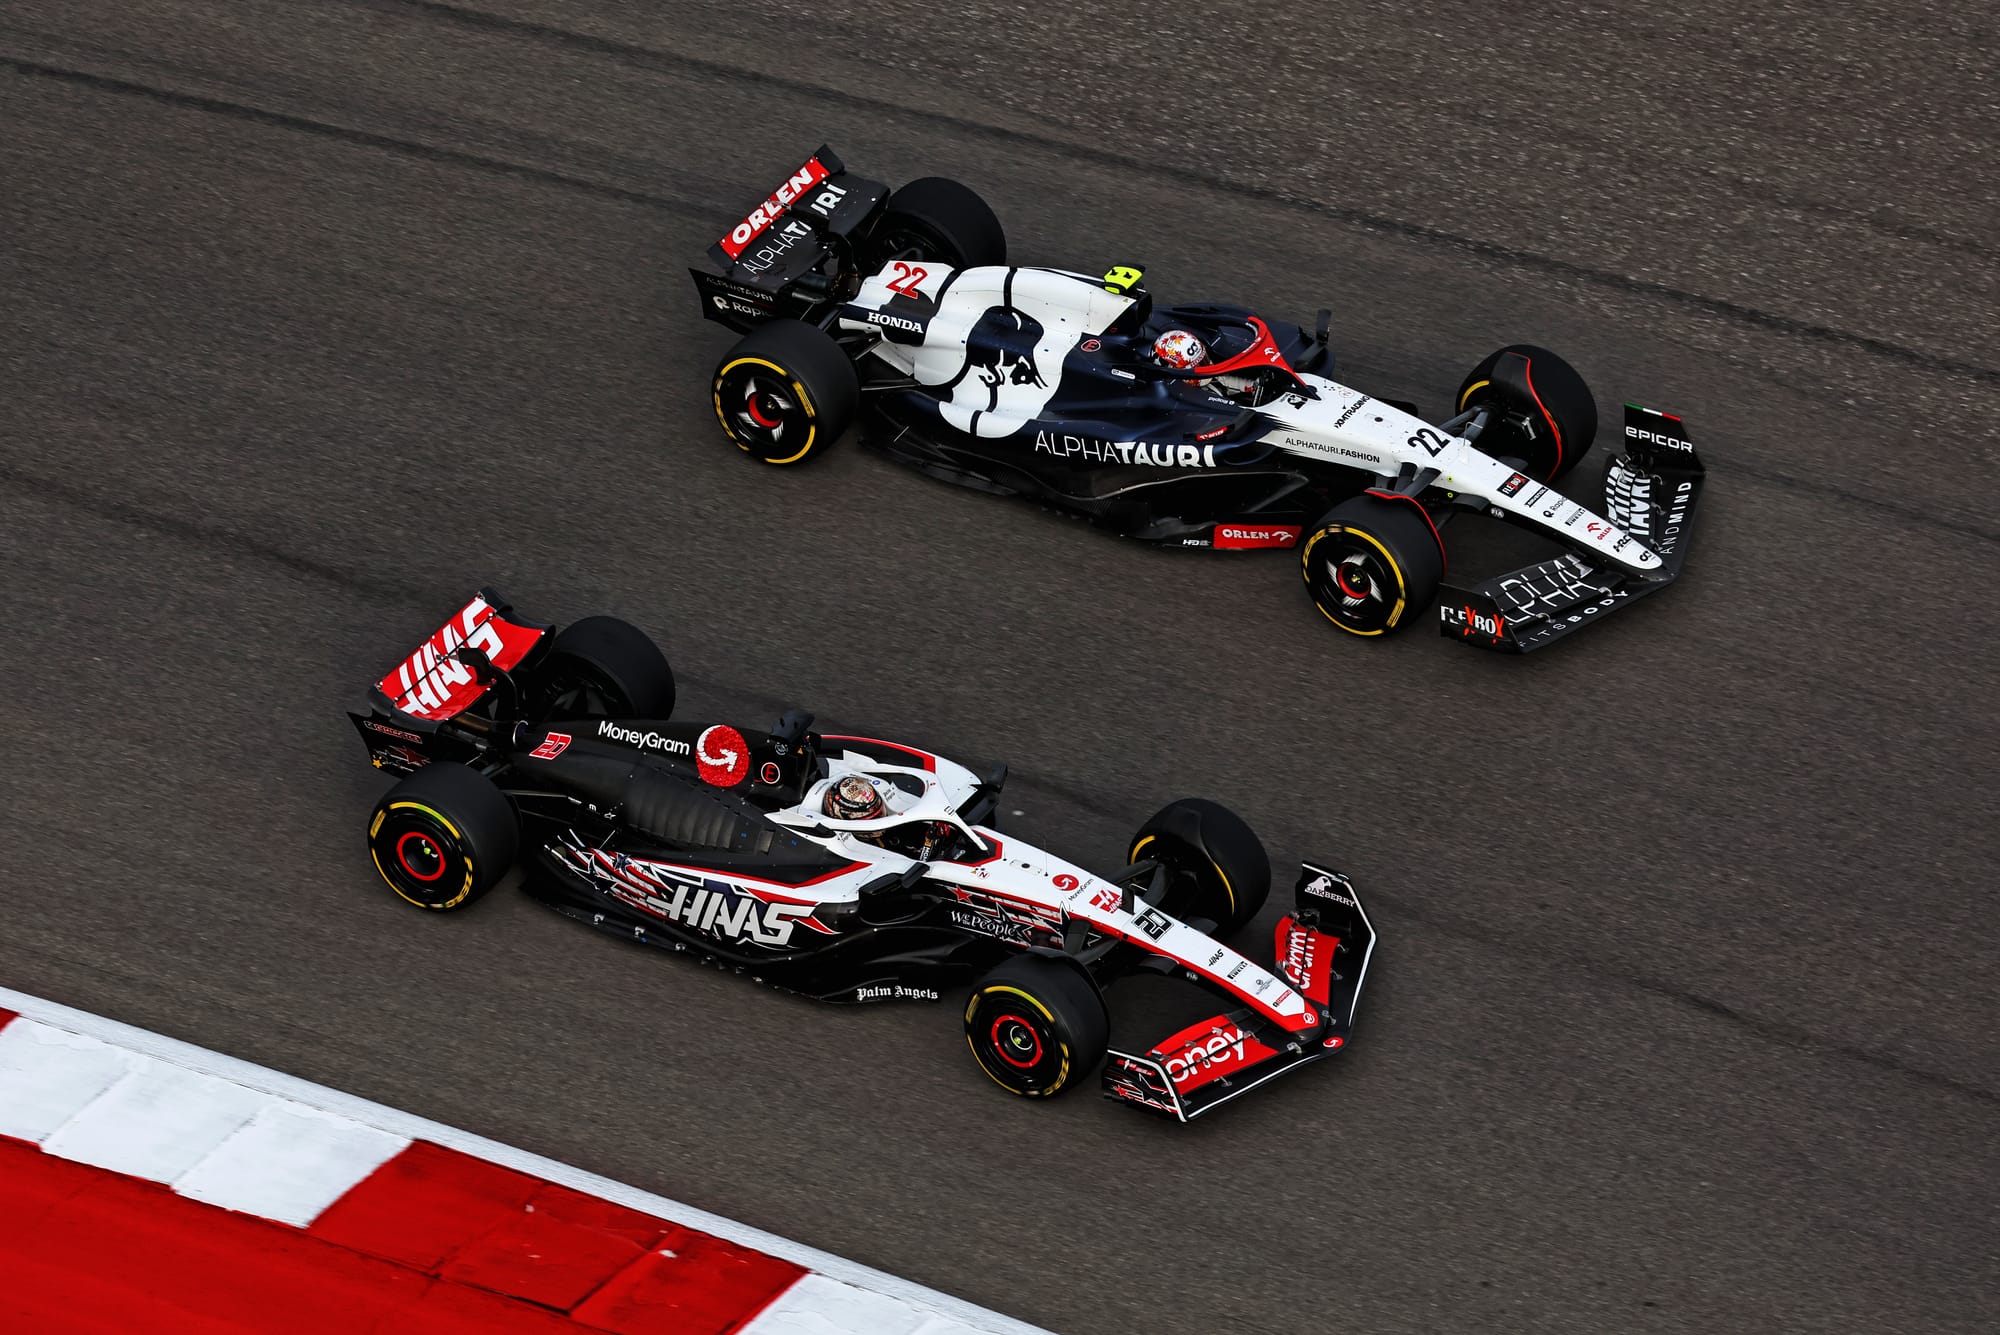 Gene Haas risks wasting a billion-dollar chance for his F1 team